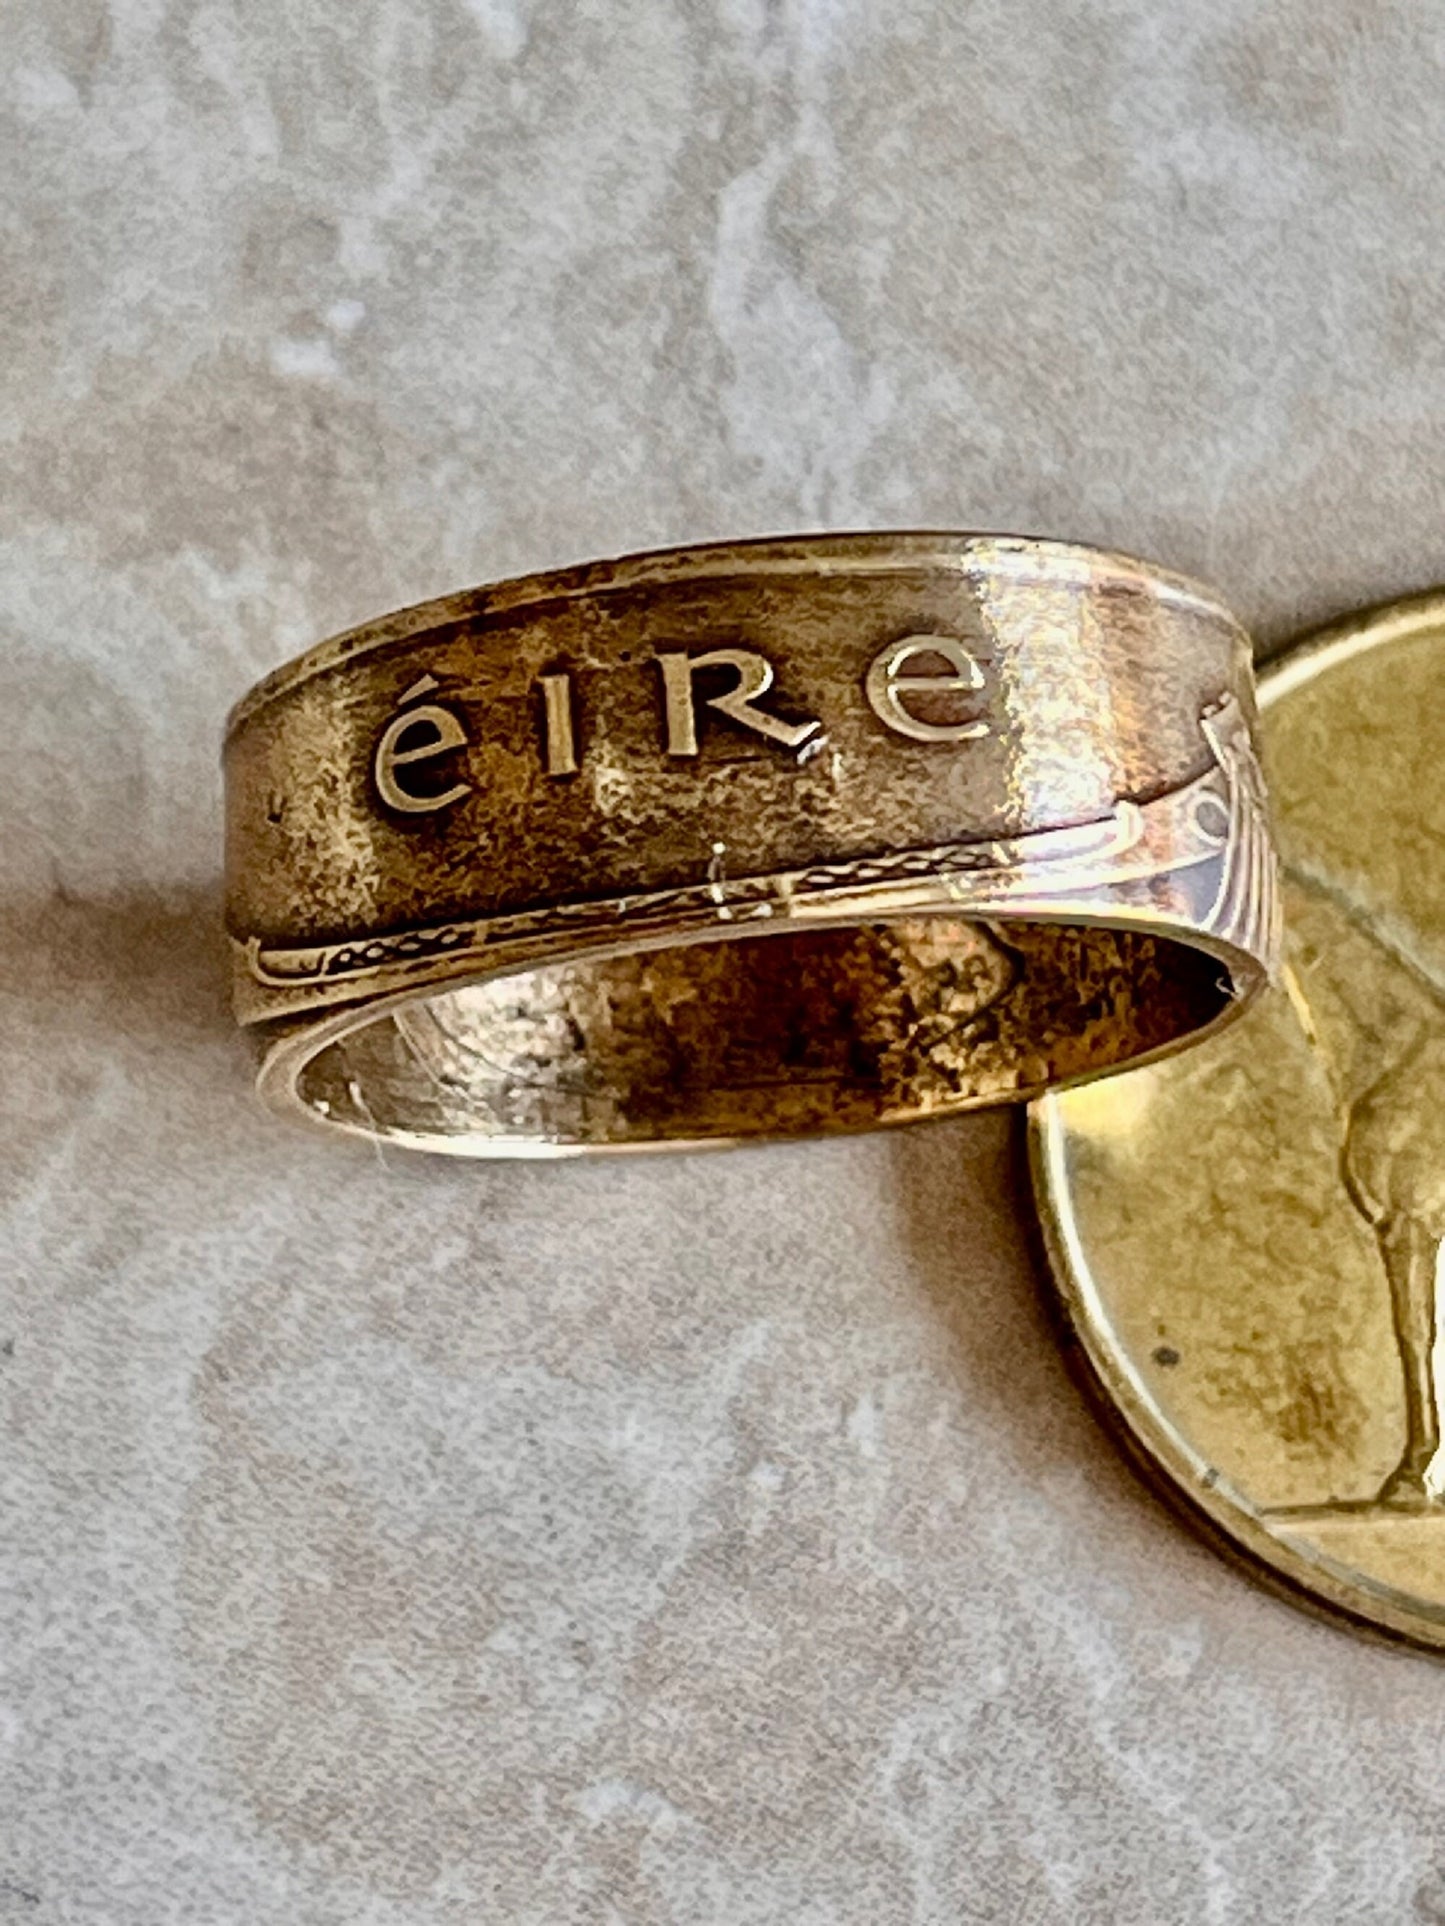 Ireland Coin Ring 20 Pence Irish Celtic Harp Lucky Shamrock Jewelry Gift Charm For Friend Coin Ring Gift For Him Her World Coins Collector